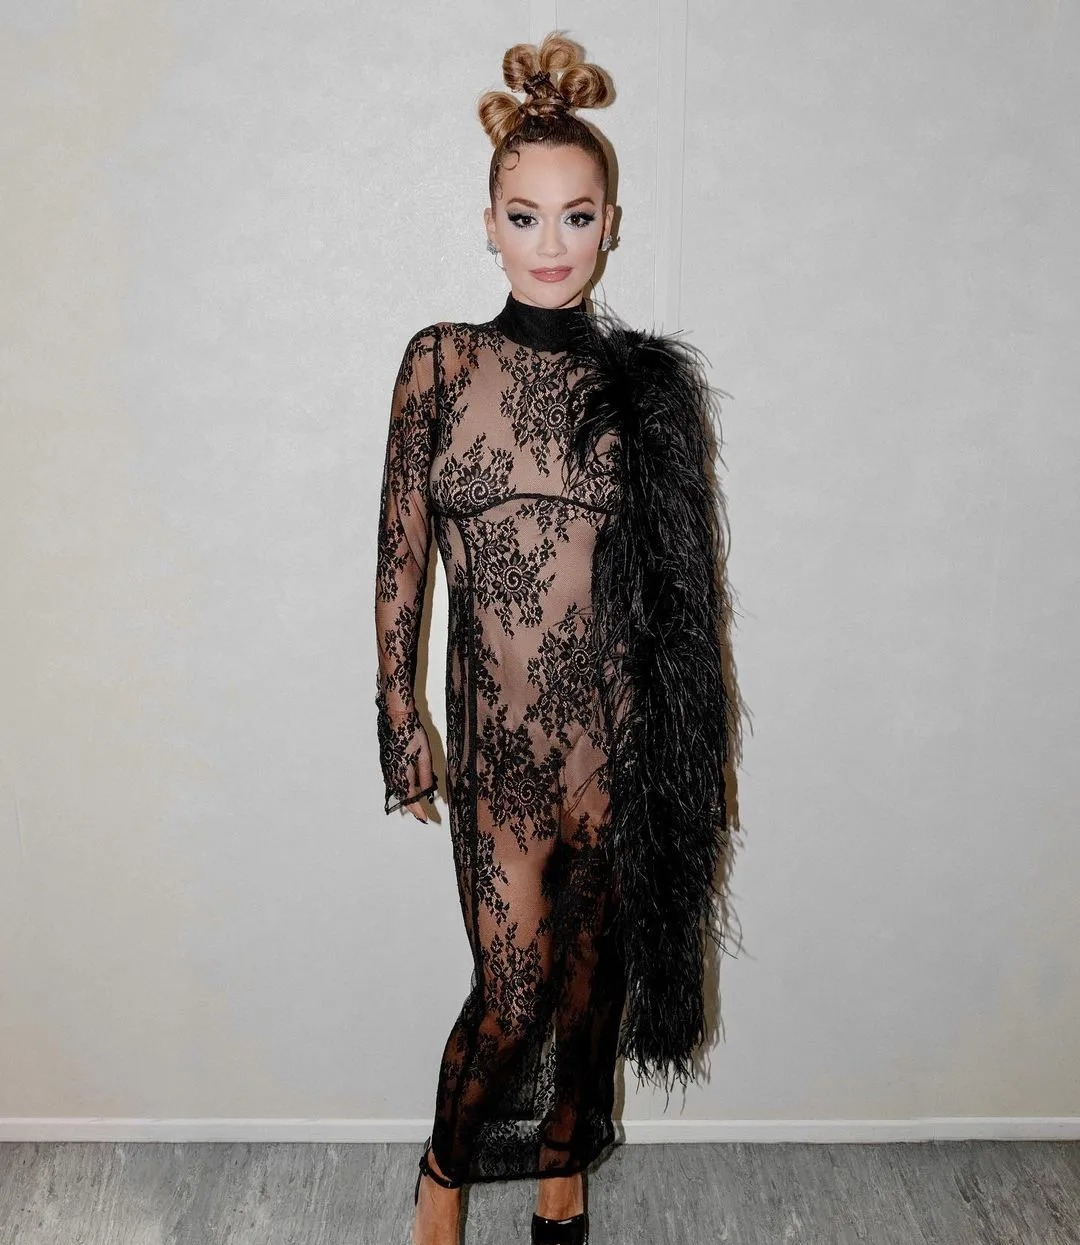 Rita Ora drives fans wild in sheer lace dress backstage at The Masked Singer